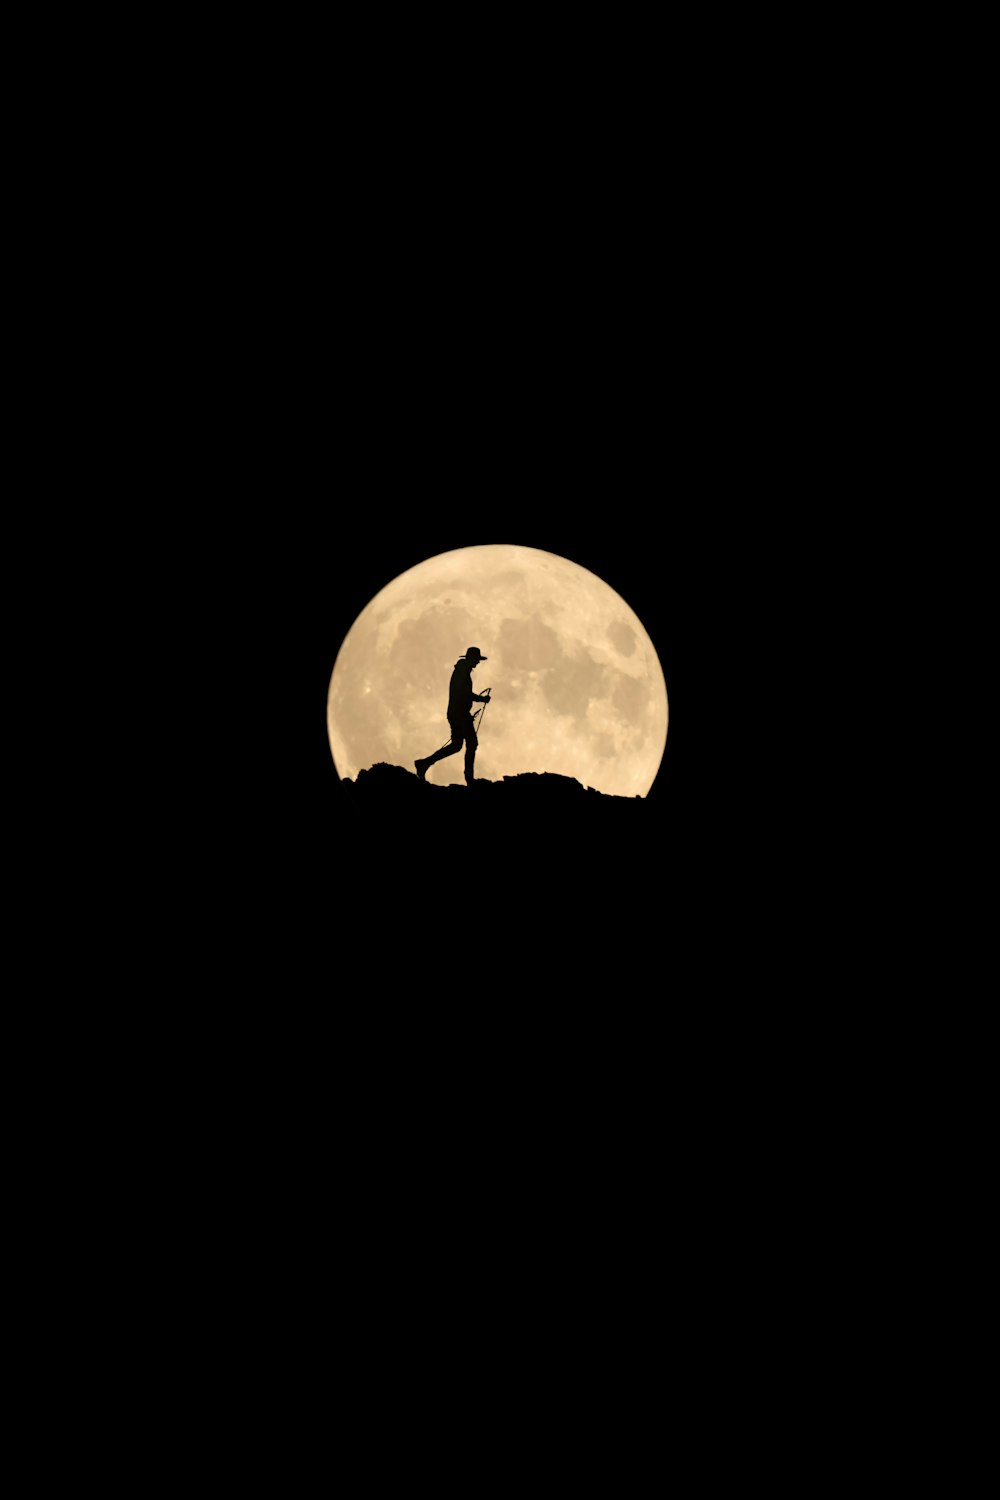 a person standing on top of a hill under a full moon